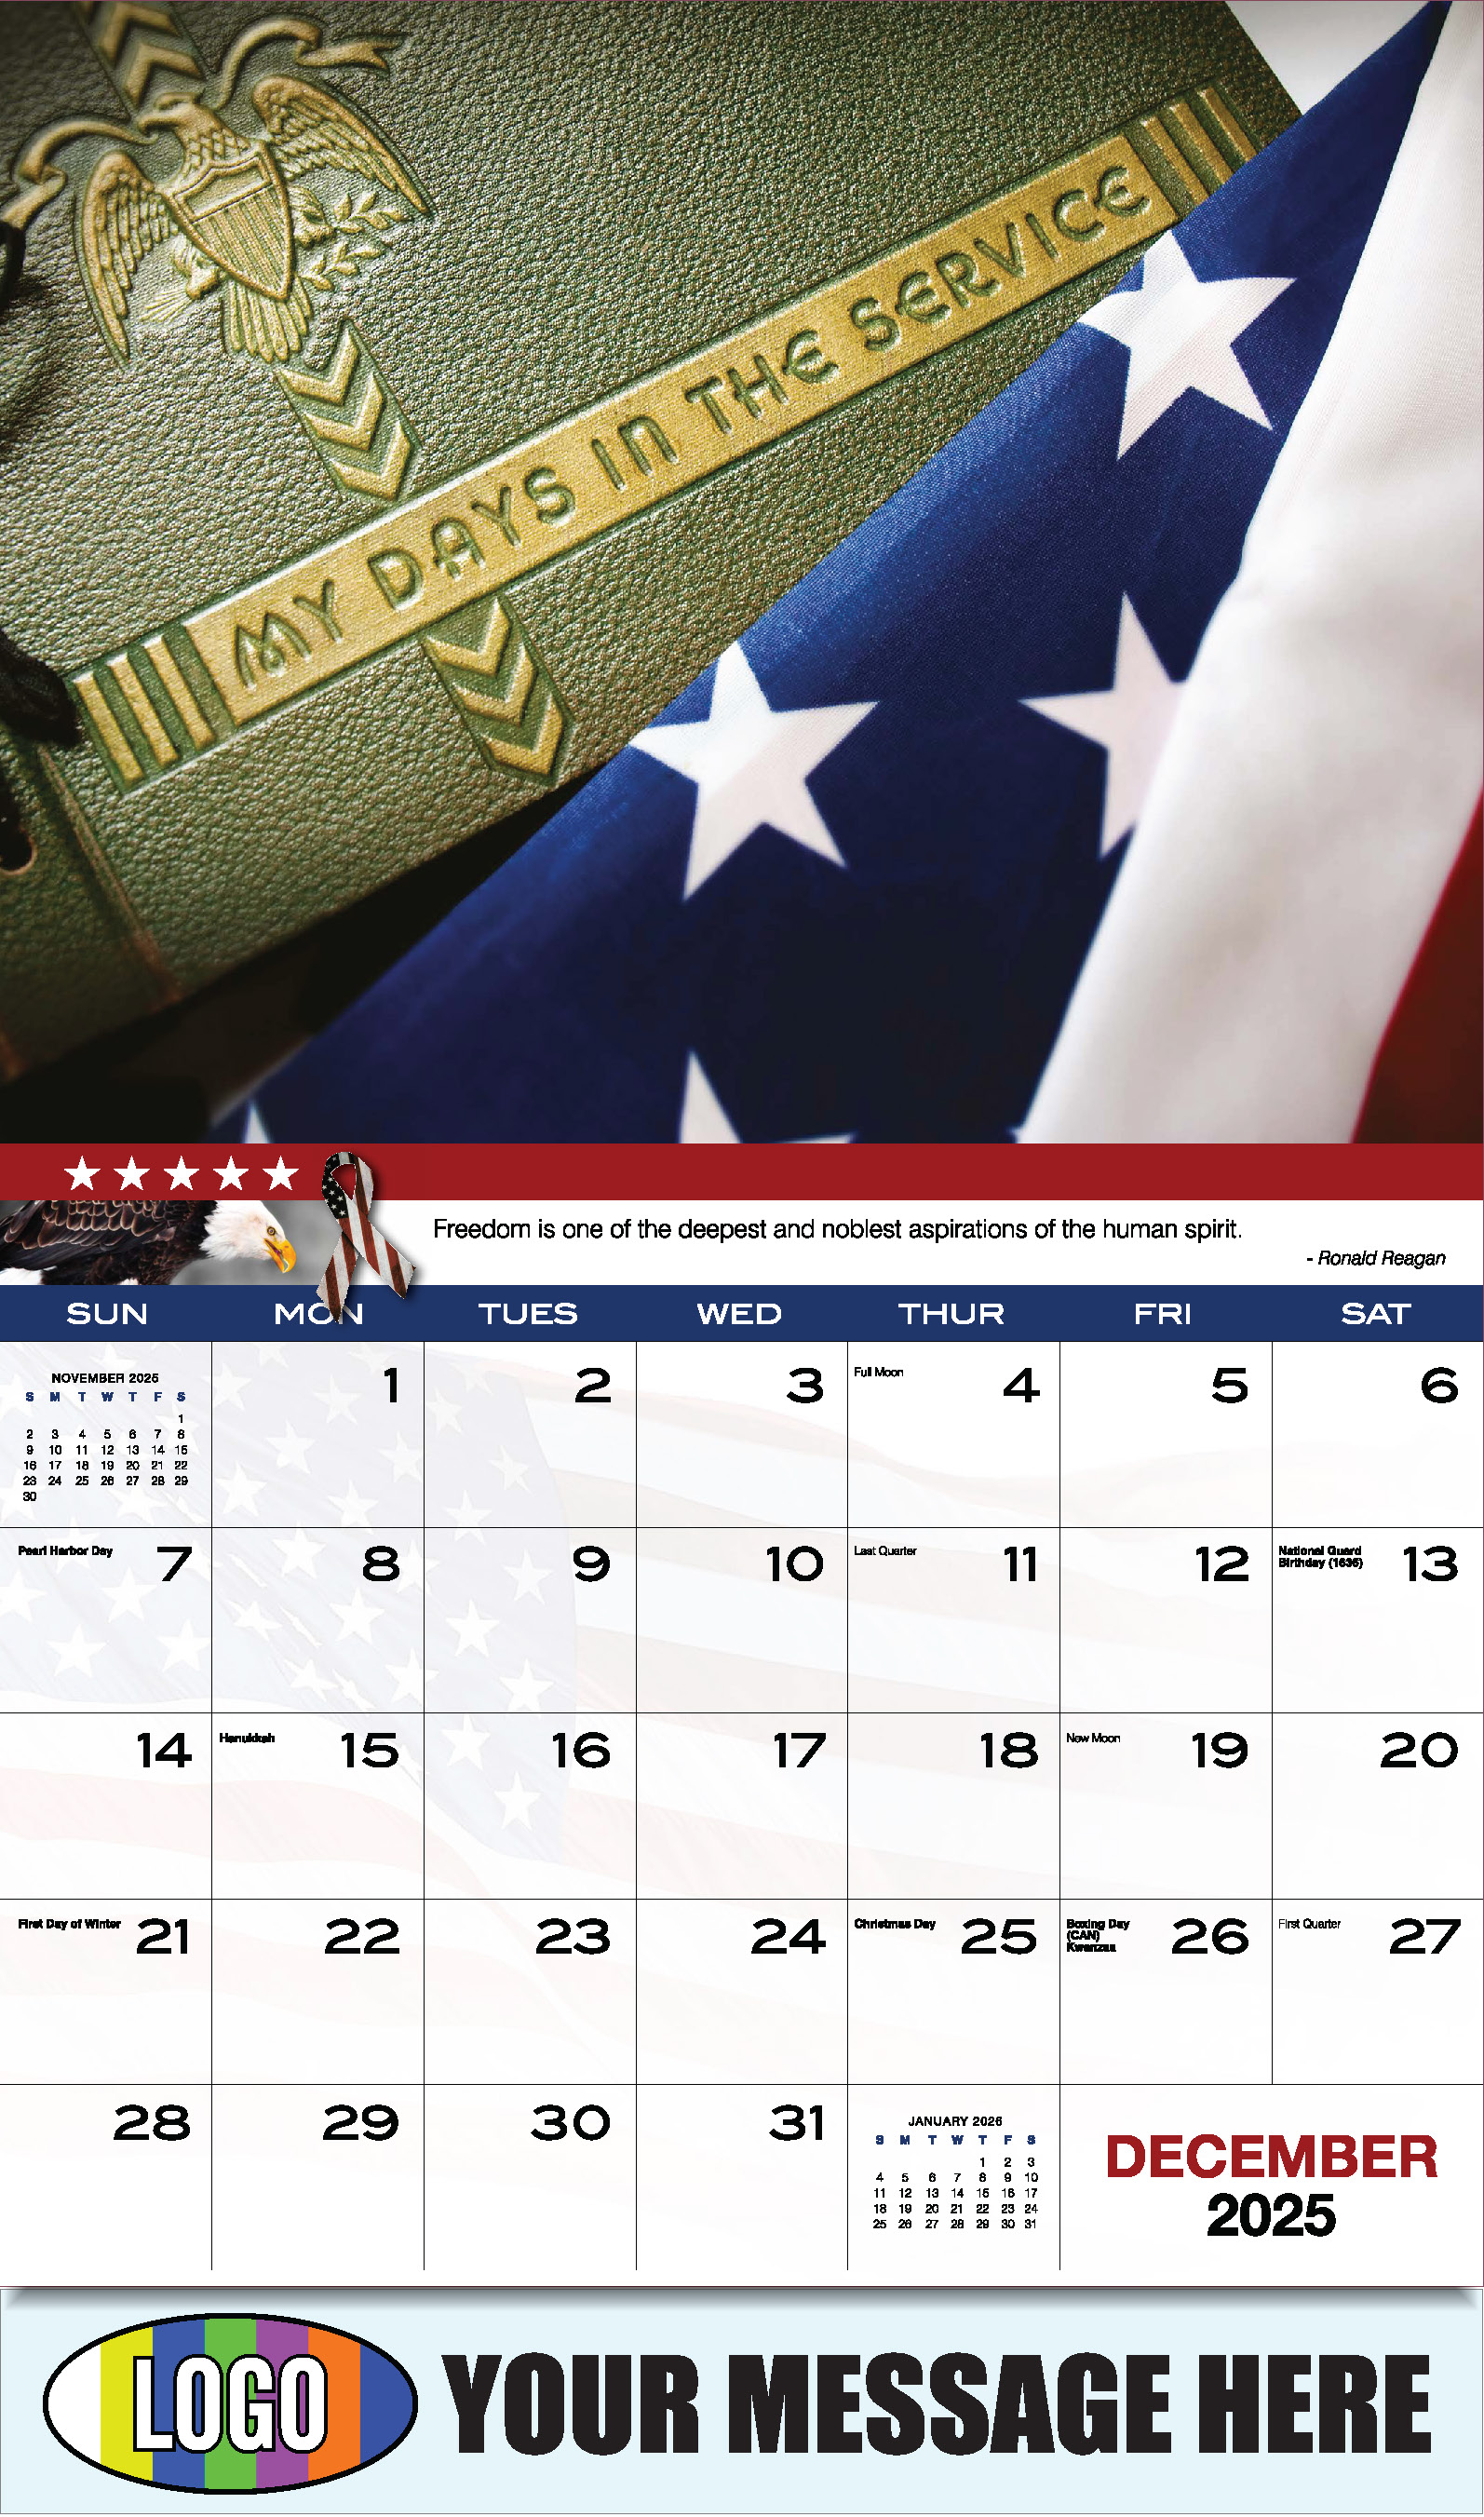 Home of the Brave 2025 USA Armed Forces Business Promo Calendar - December